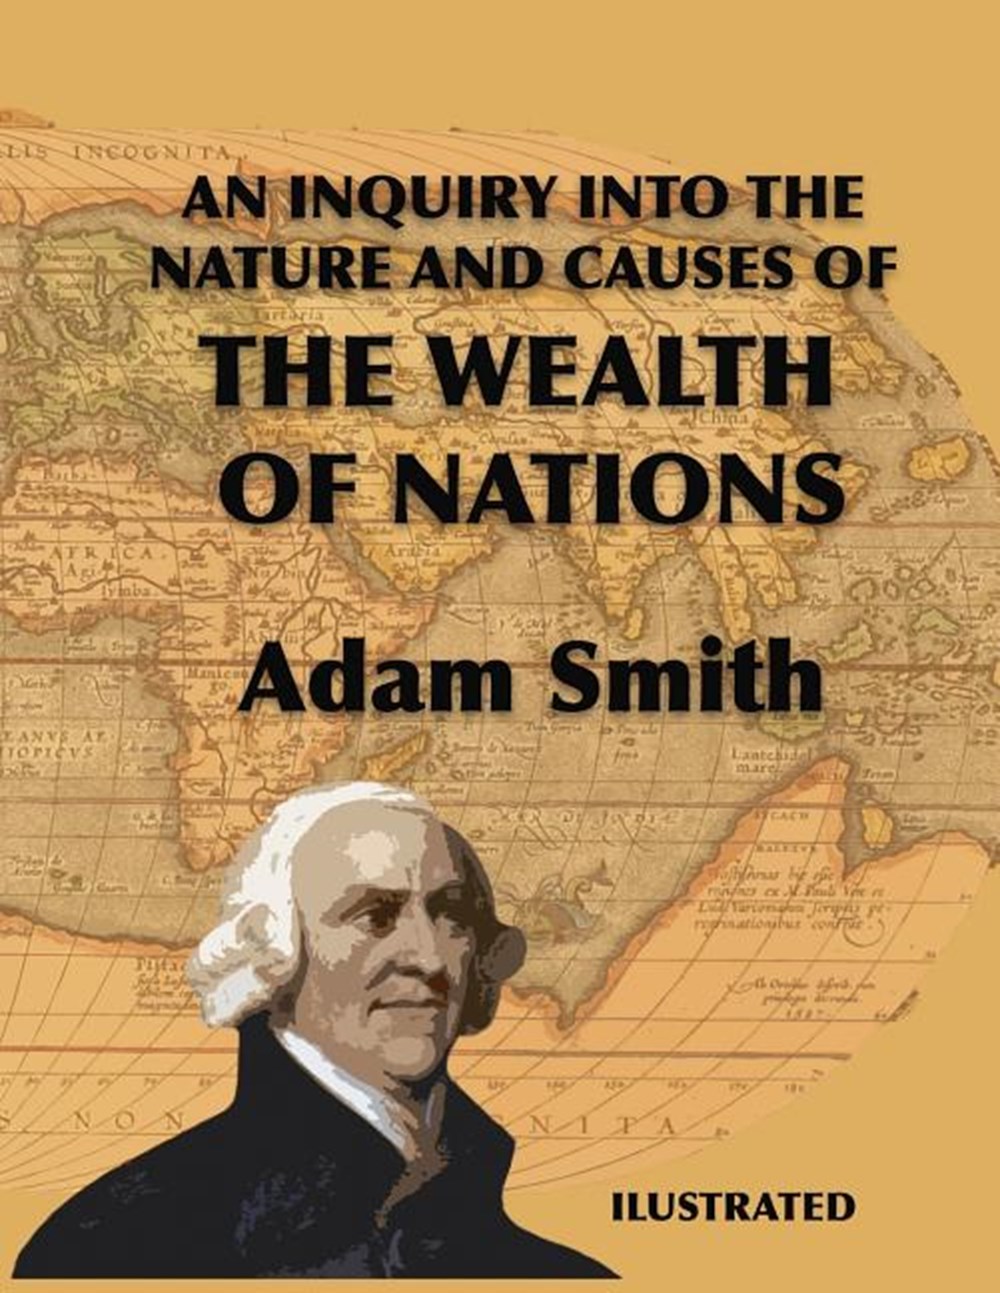 An Inquiry the Nature and Causes the Wealth of Nations in Paperback by